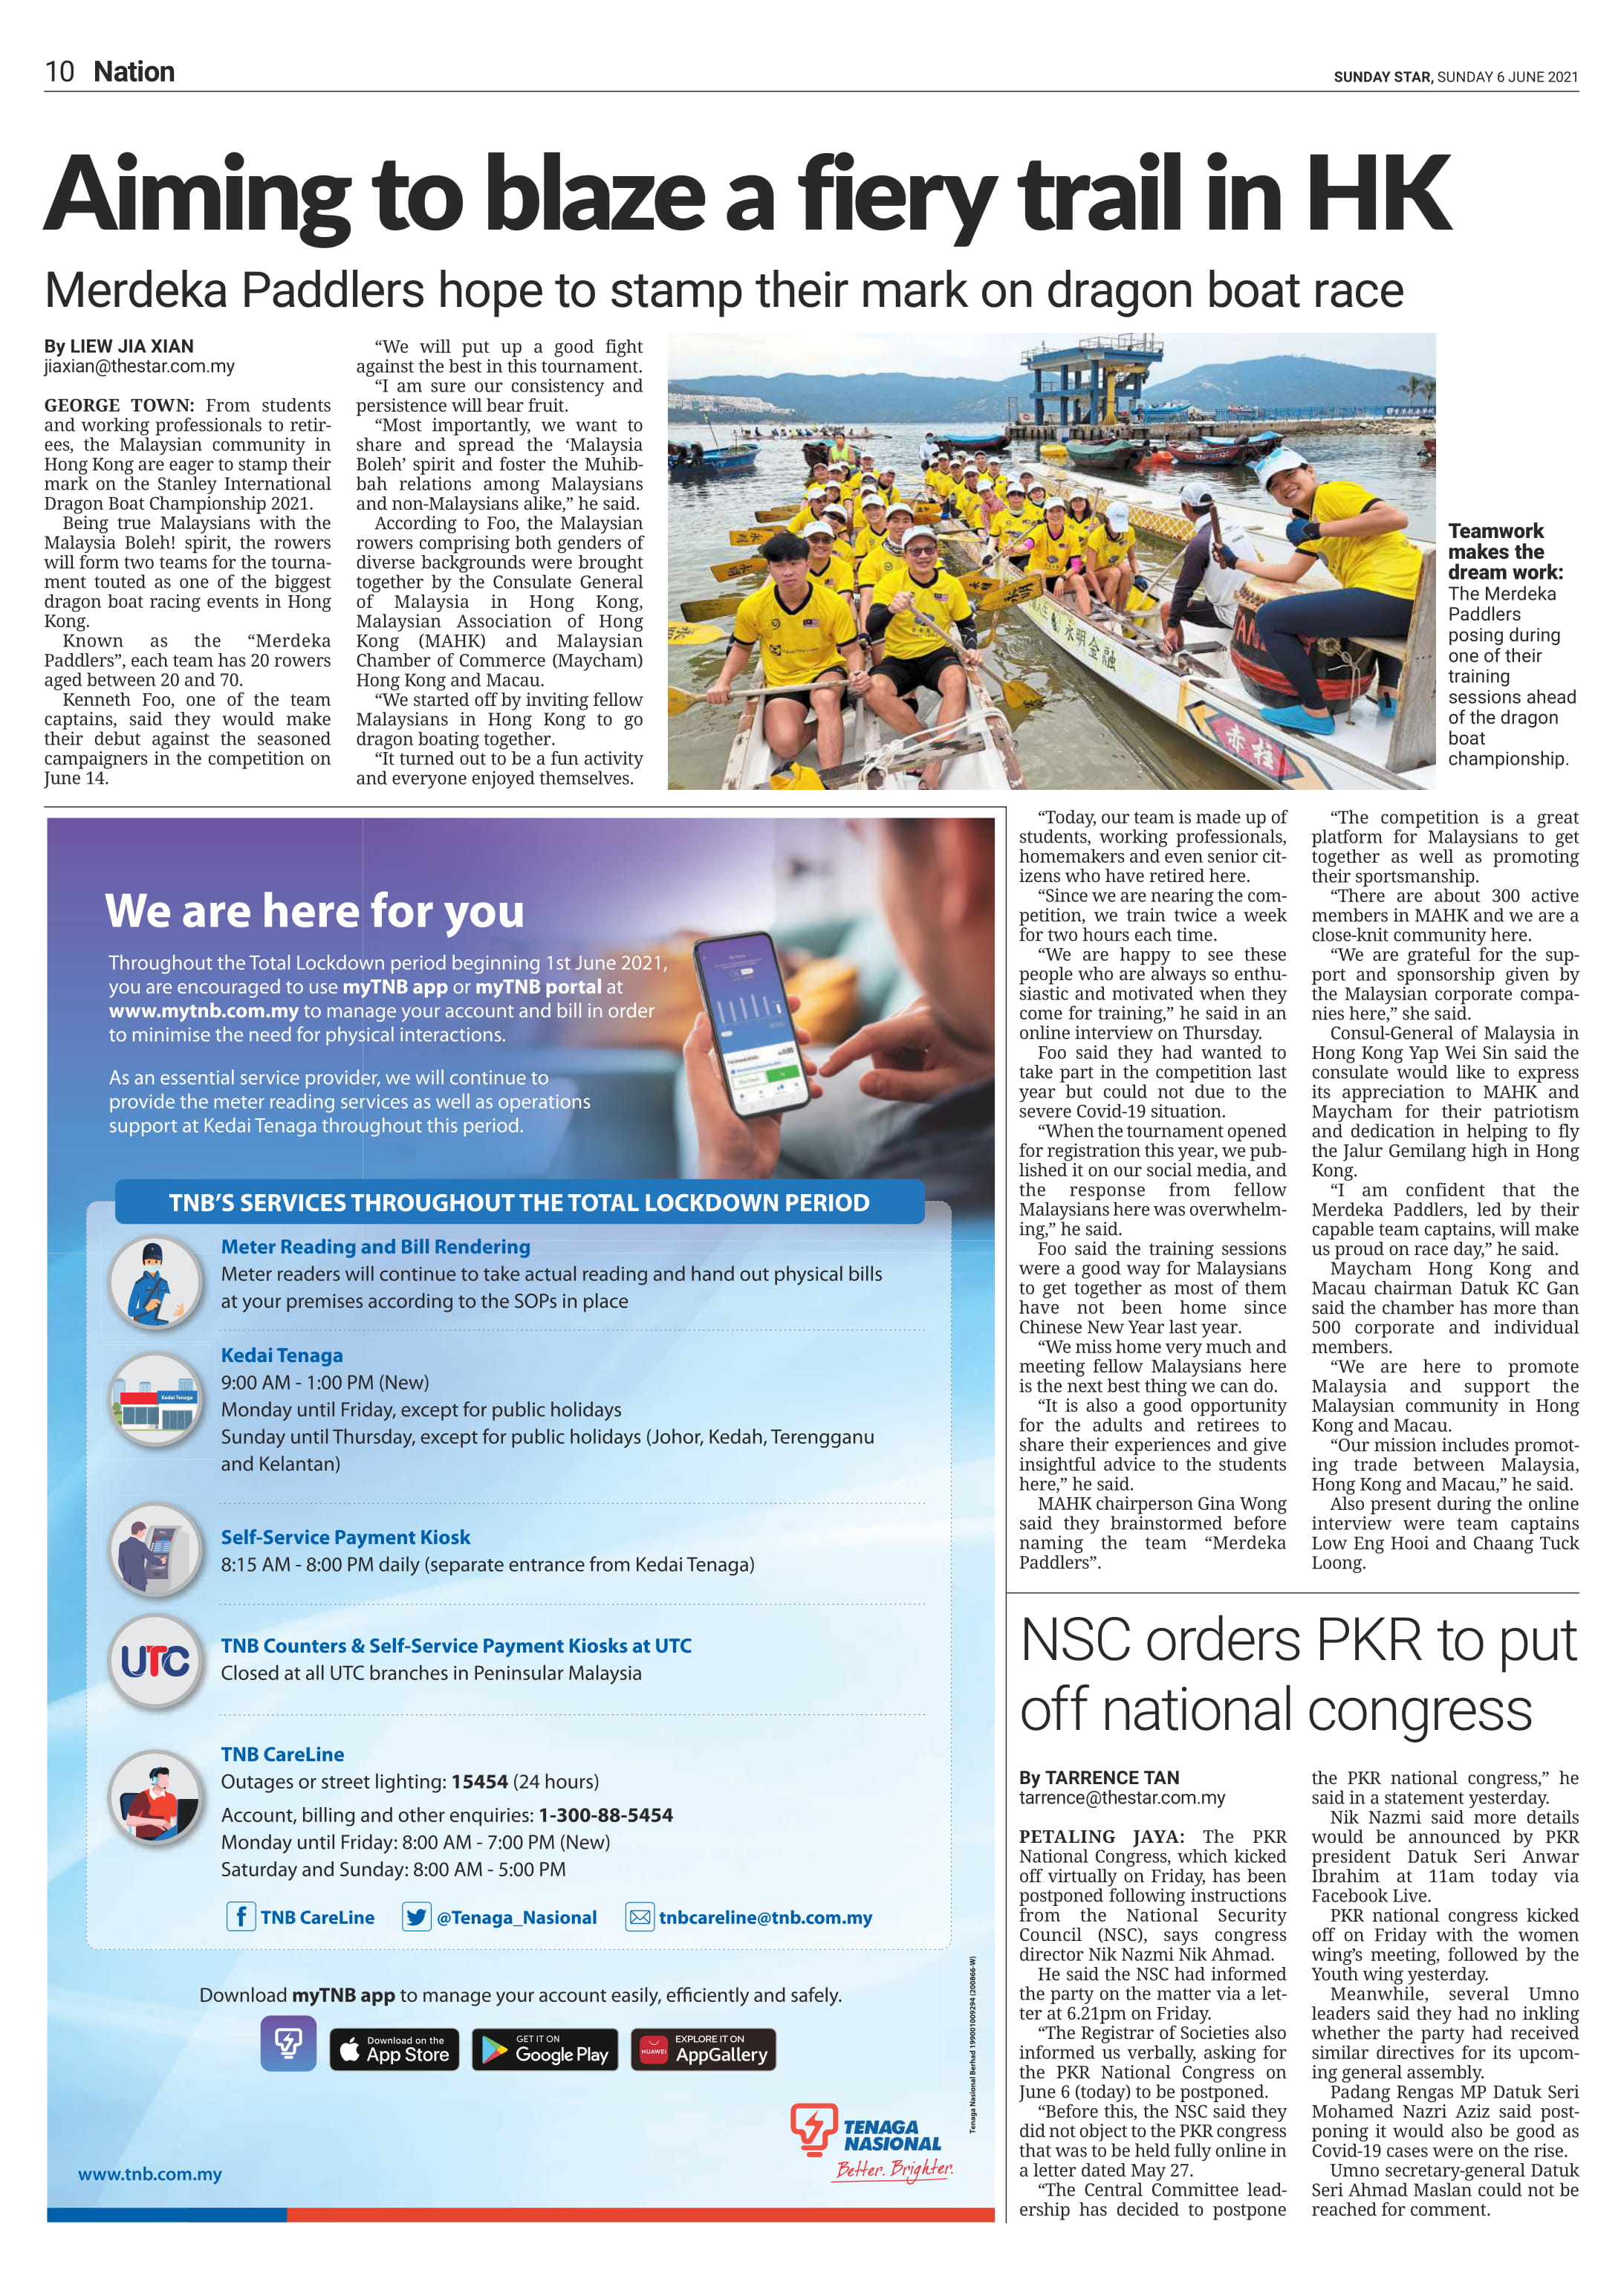 20210606 Merdeka Paddlers hope to stamp their mark on dragon boat race_The Star